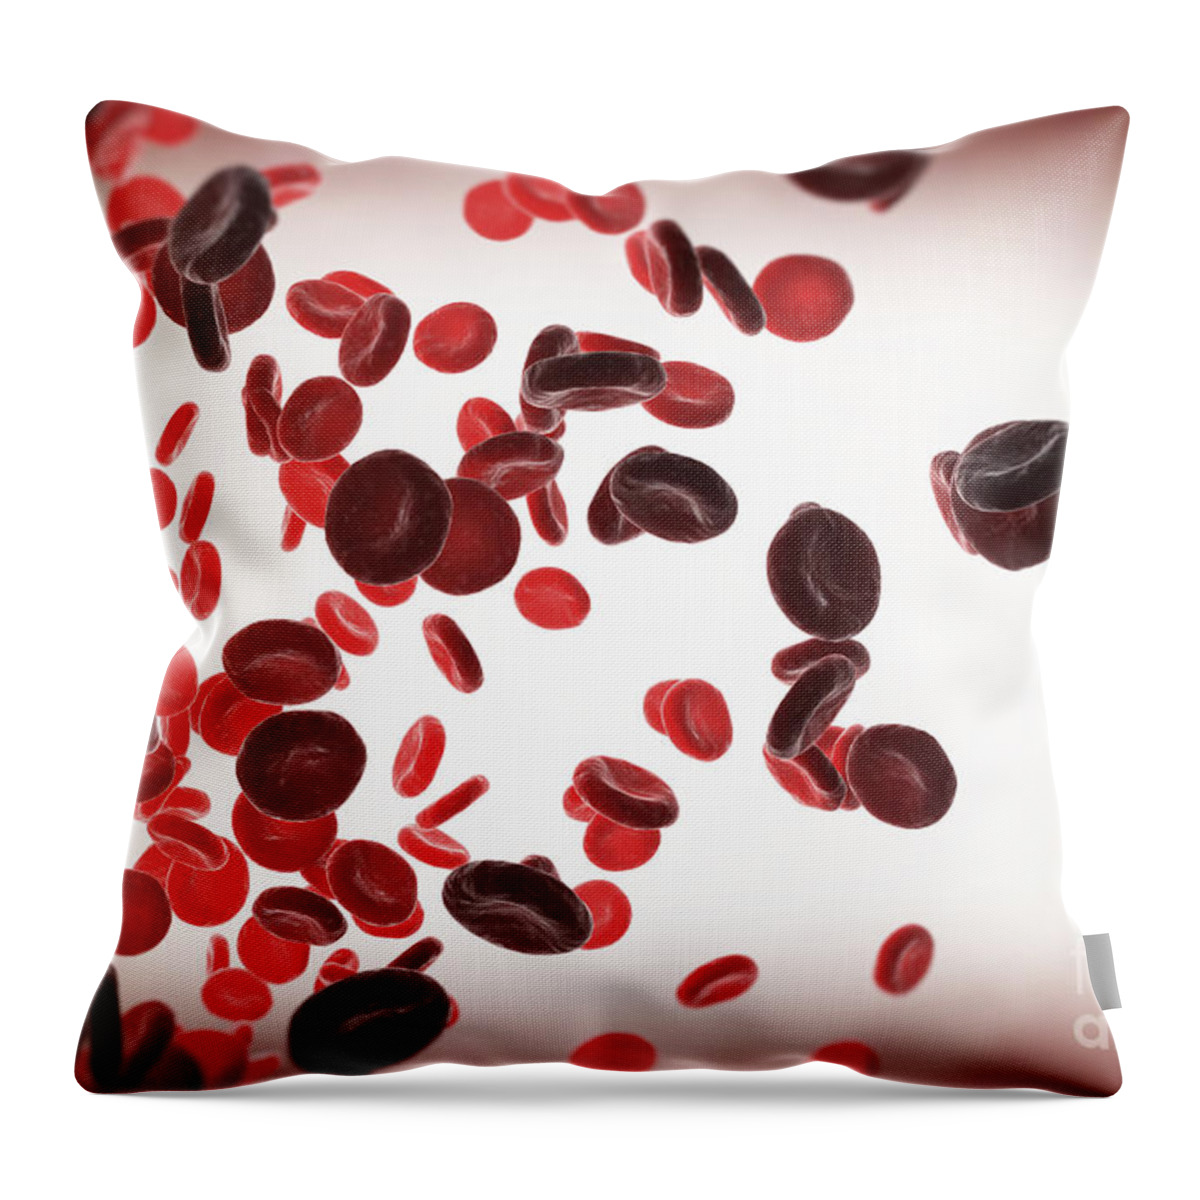 Digitally Generated Image Throw Pillow featuring the photograph Red Blood Cells #43 by Science Picture Co